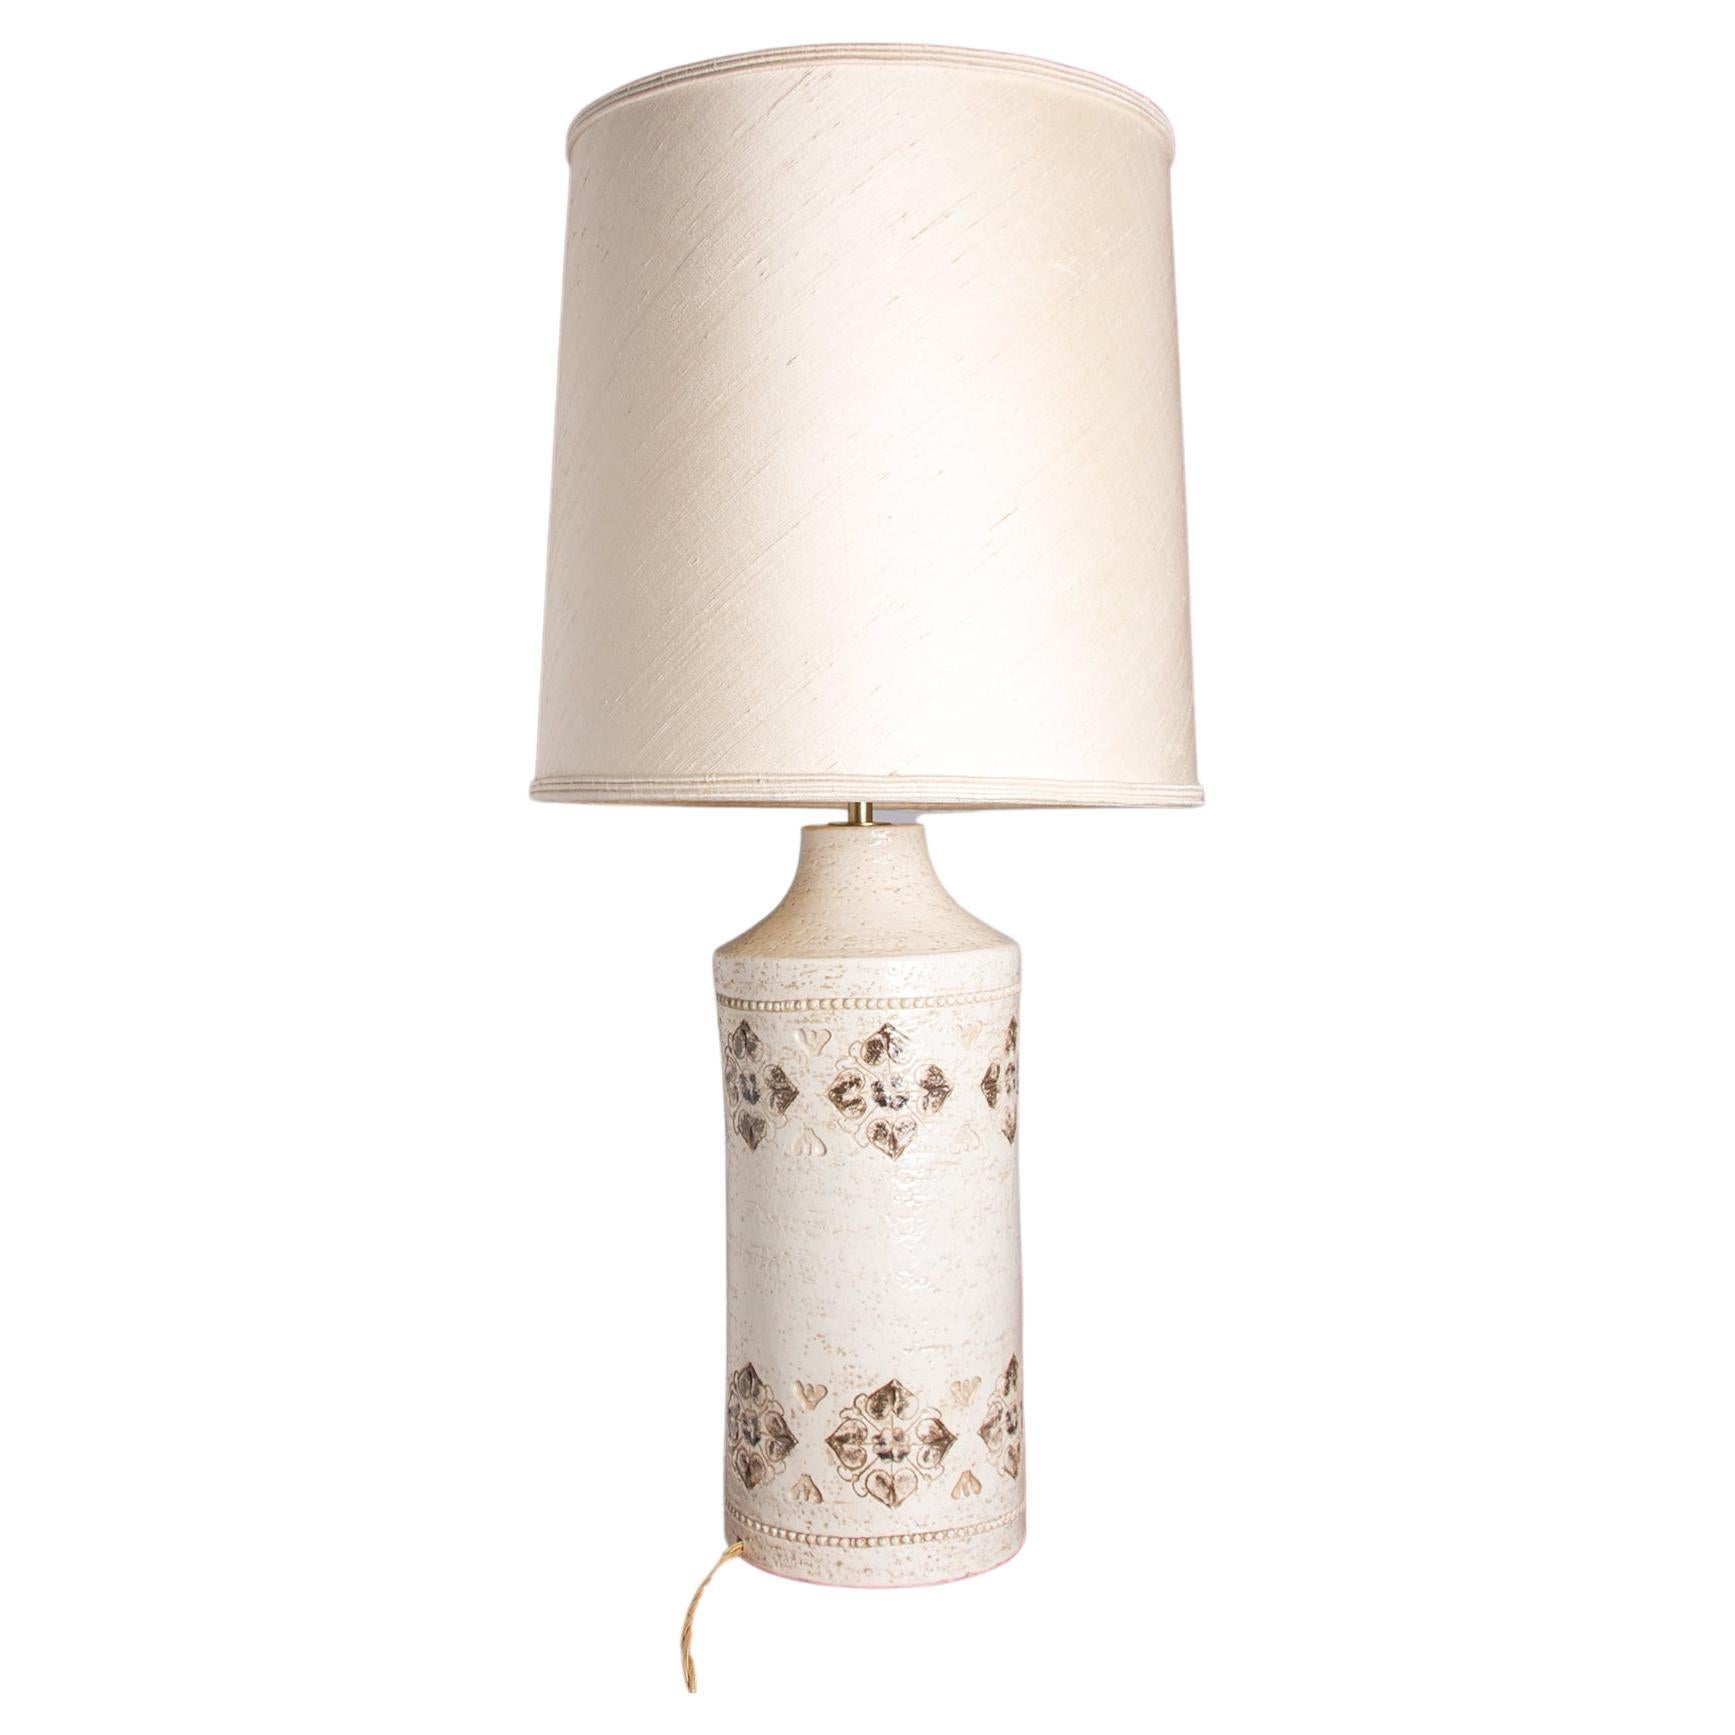 Large Danish table lamp in beige enamelled stoneware by Bitossi for Bergboms 196 For Sale